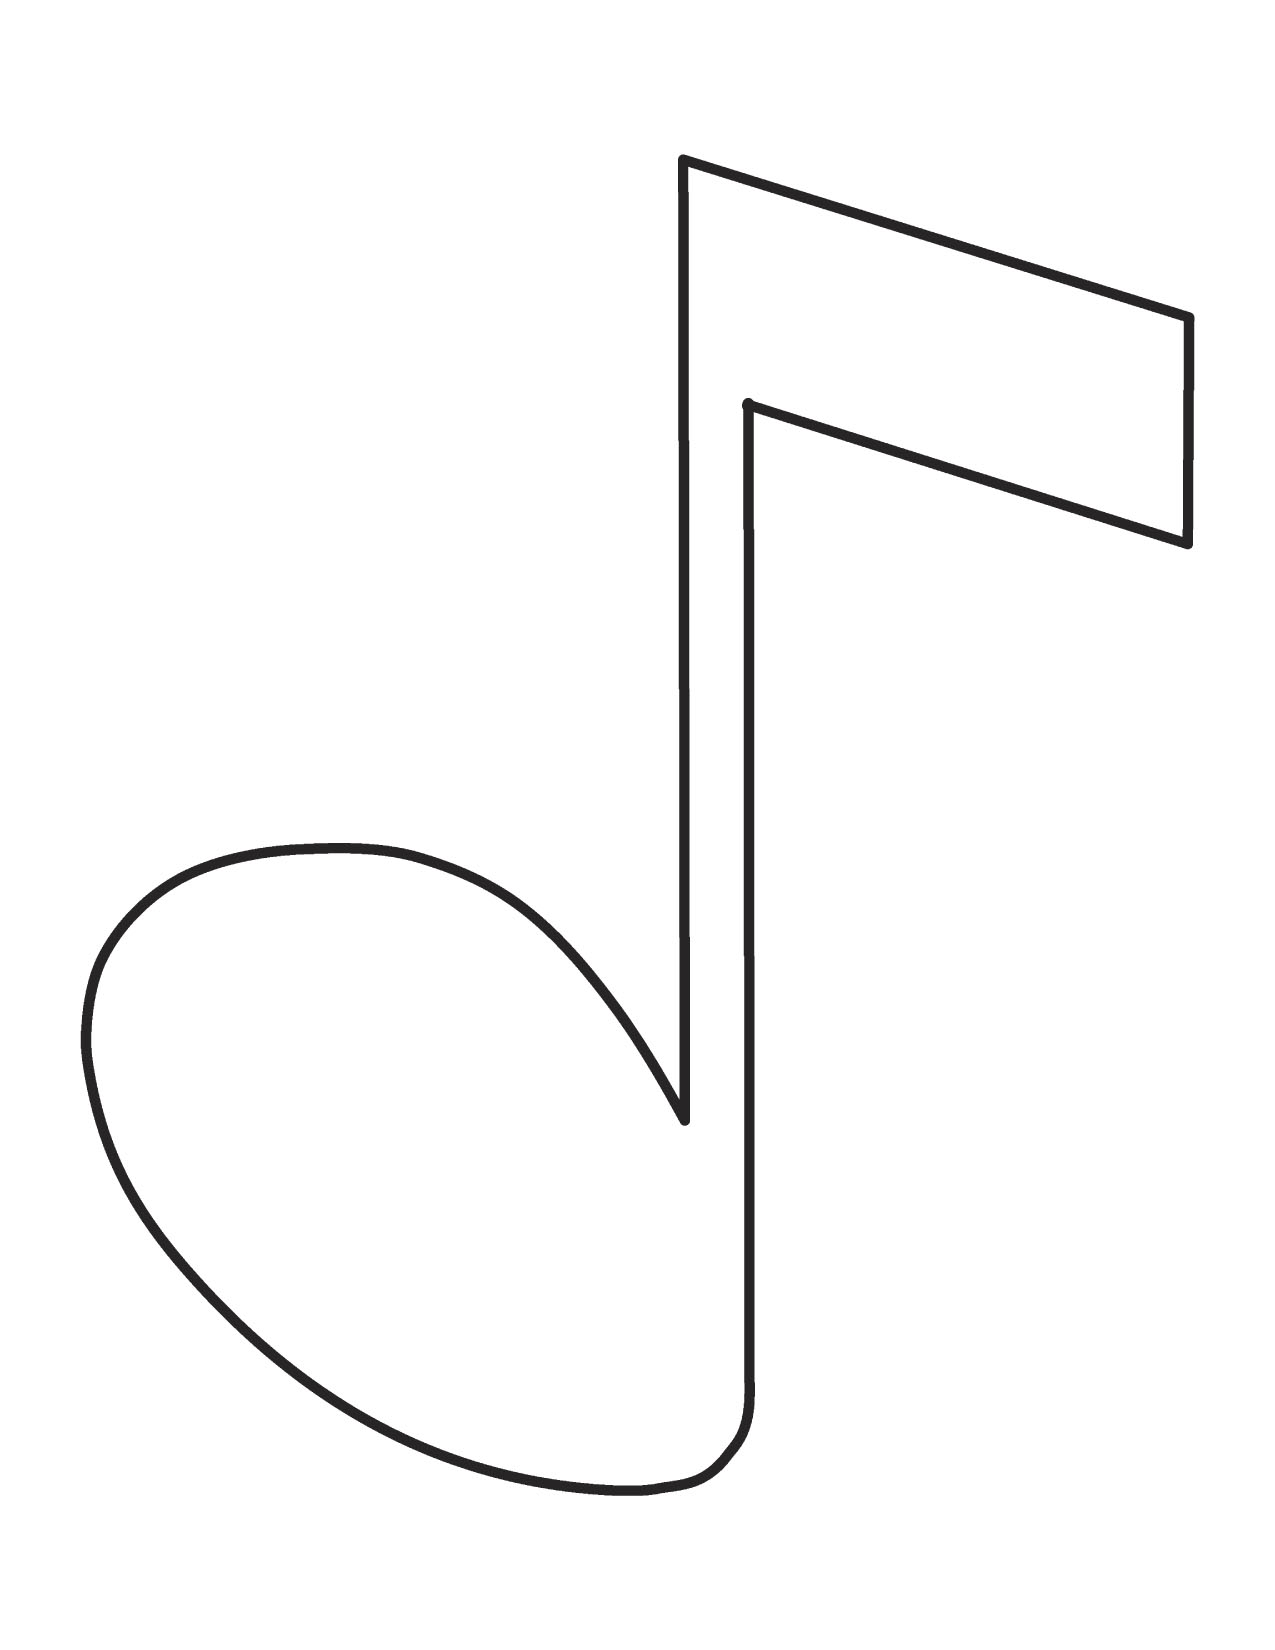 Music notes  black and white showing post clip art